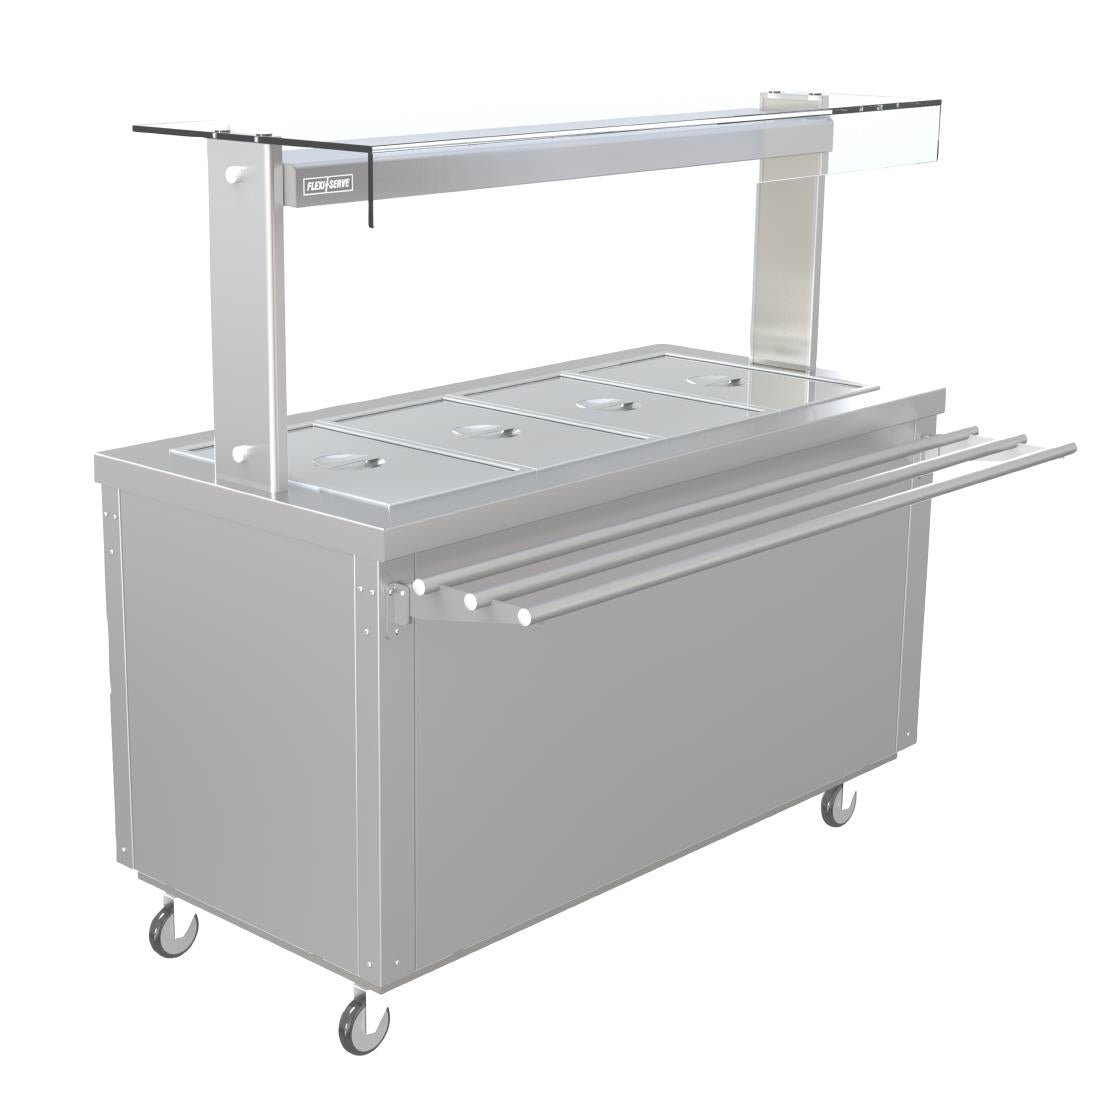 CH192 Parry Flexi-Serve Hot Cupboard with Wet Bain Marie Top and Quartz Heated Gantry FS-HBW4PACK JD Catering Equipment Solutions Ltd